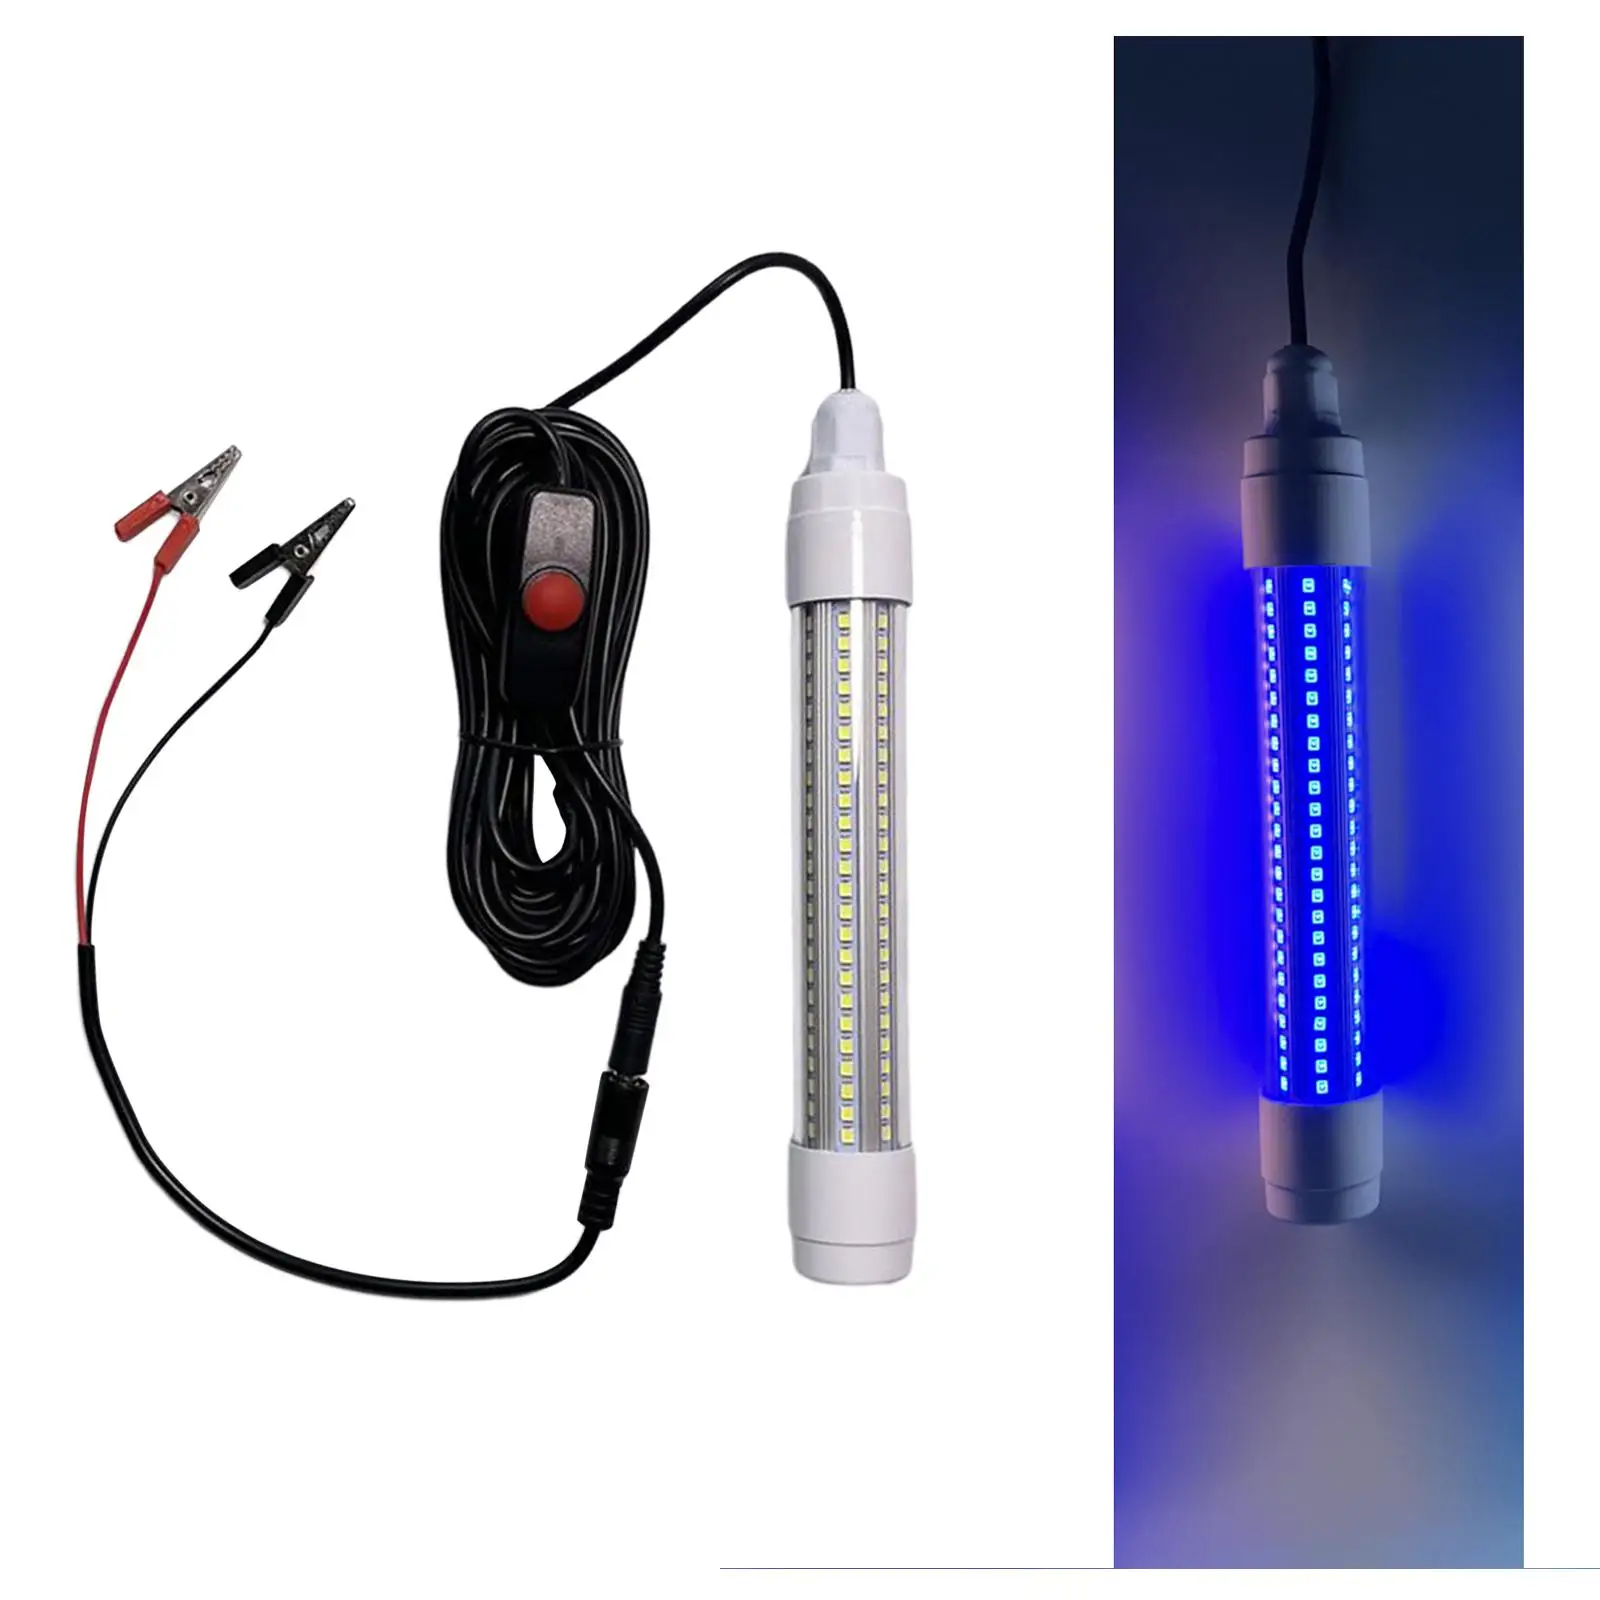 12V Fishing Light Lamps Submersible Underwater with 5M Cord 144LED for Shad Squid Squid Lure Attract Boat Accessories